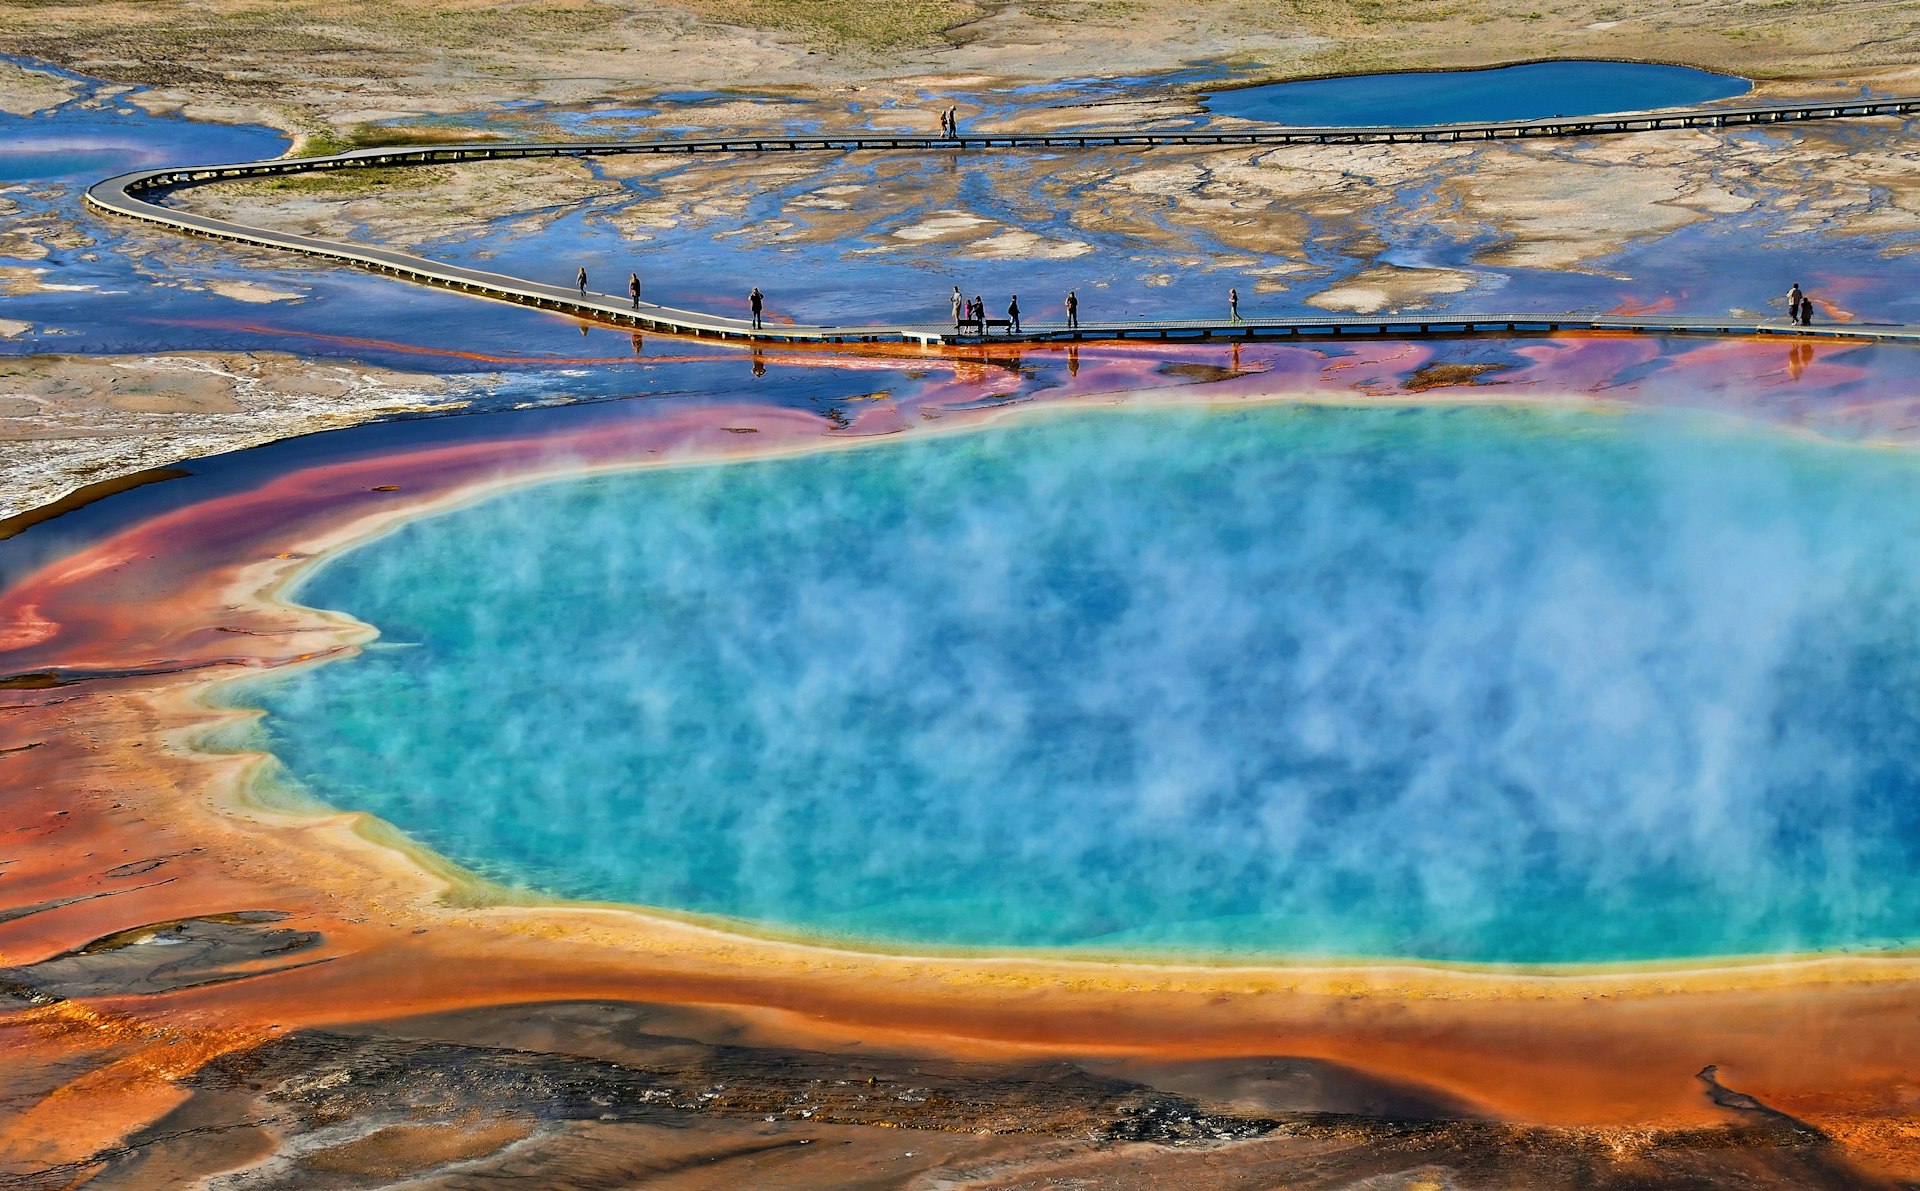 The kaleidoscopic colors of Grand Prismatic Spring in Yellowstone. Image by Noppawat Tom Charoensinphon / Getty